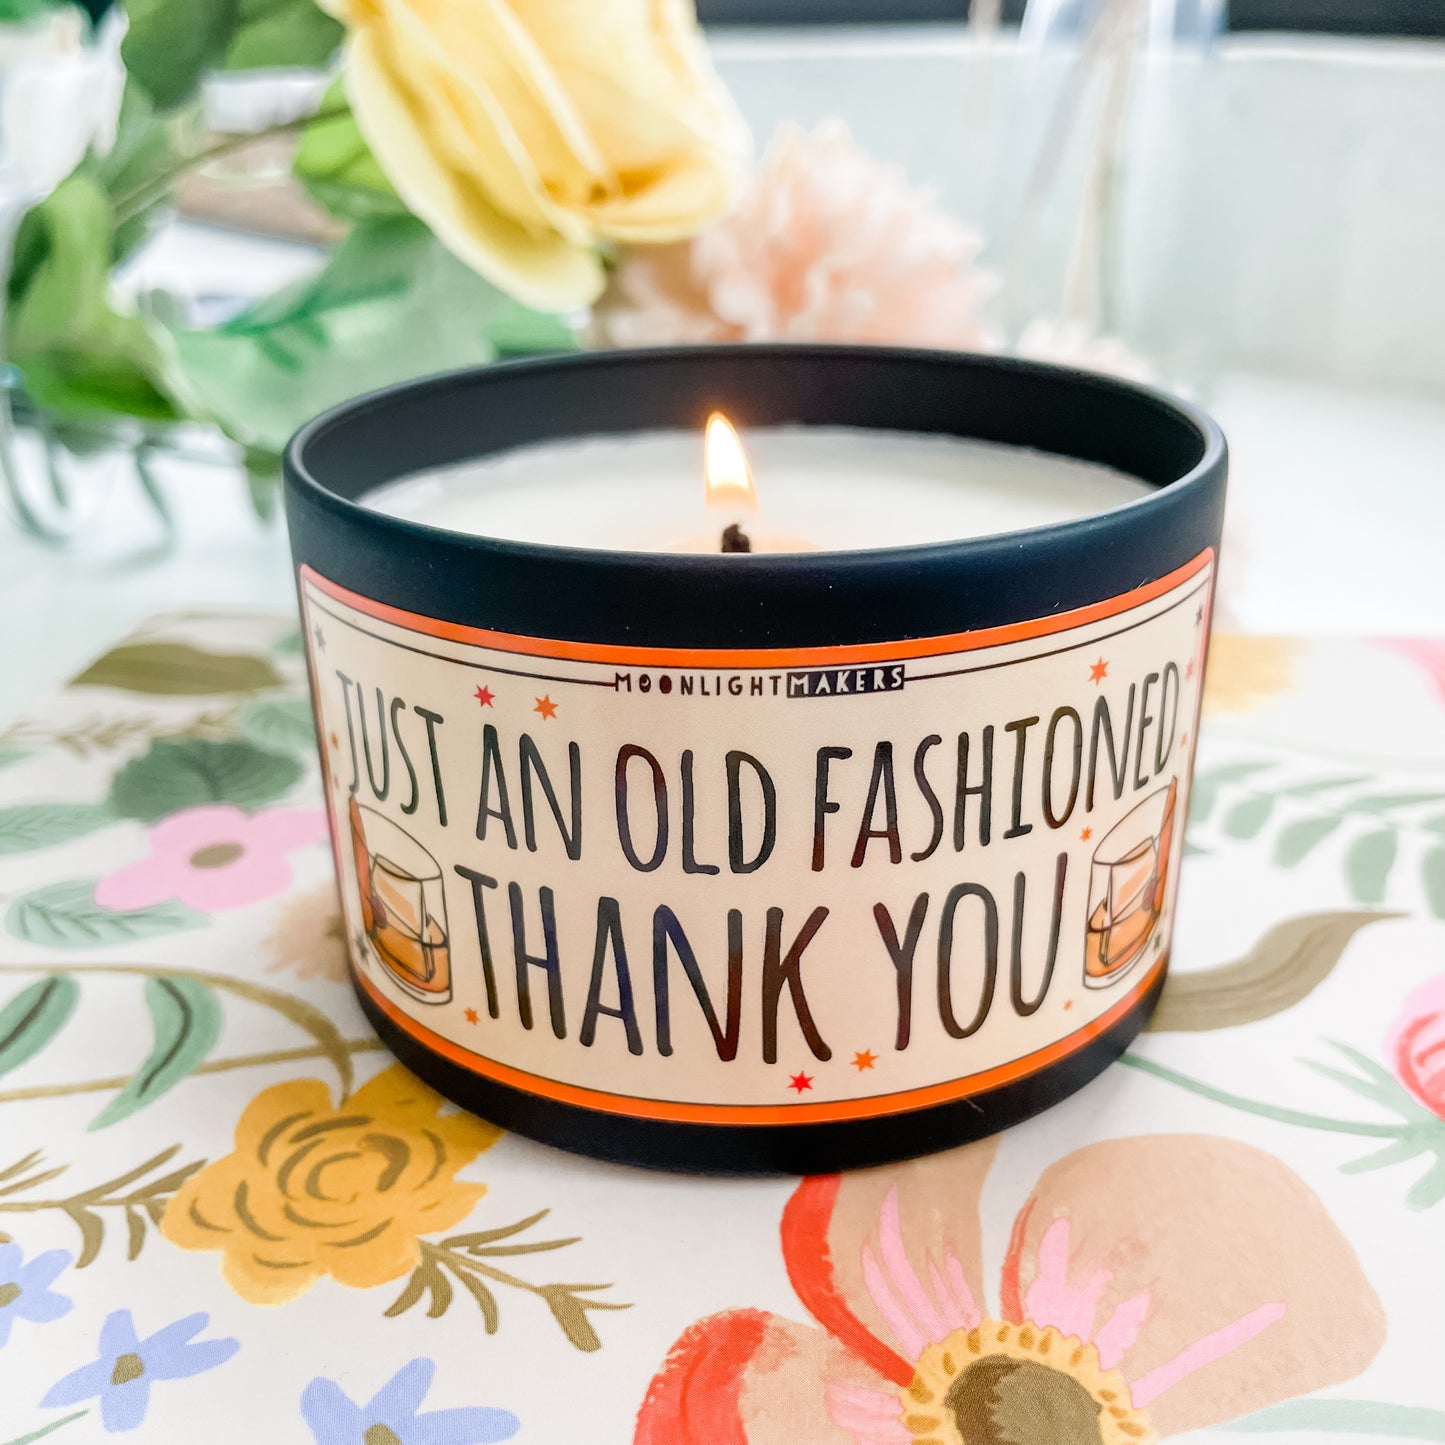 Just An Old Fashioned Thank You - 8oz Candle - Choose Your Scent - 100% Natural Soy Wax